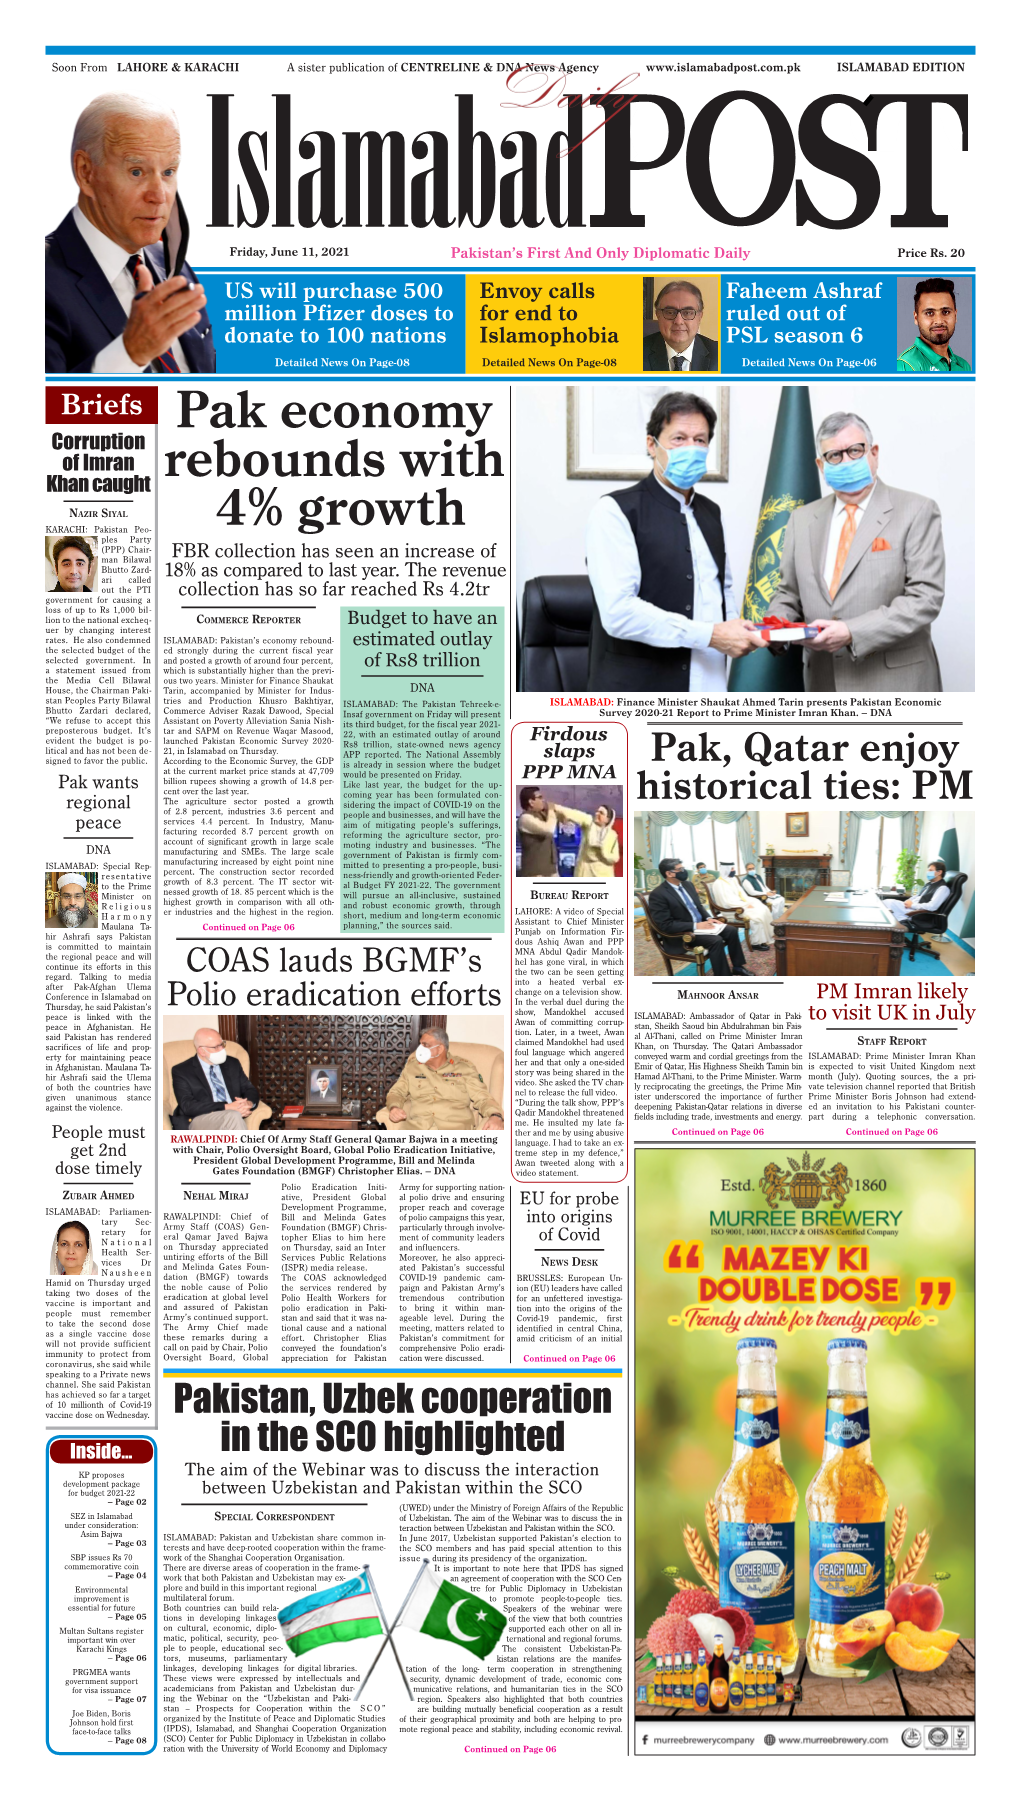 Pak Economy Rebounds with 4% Growth